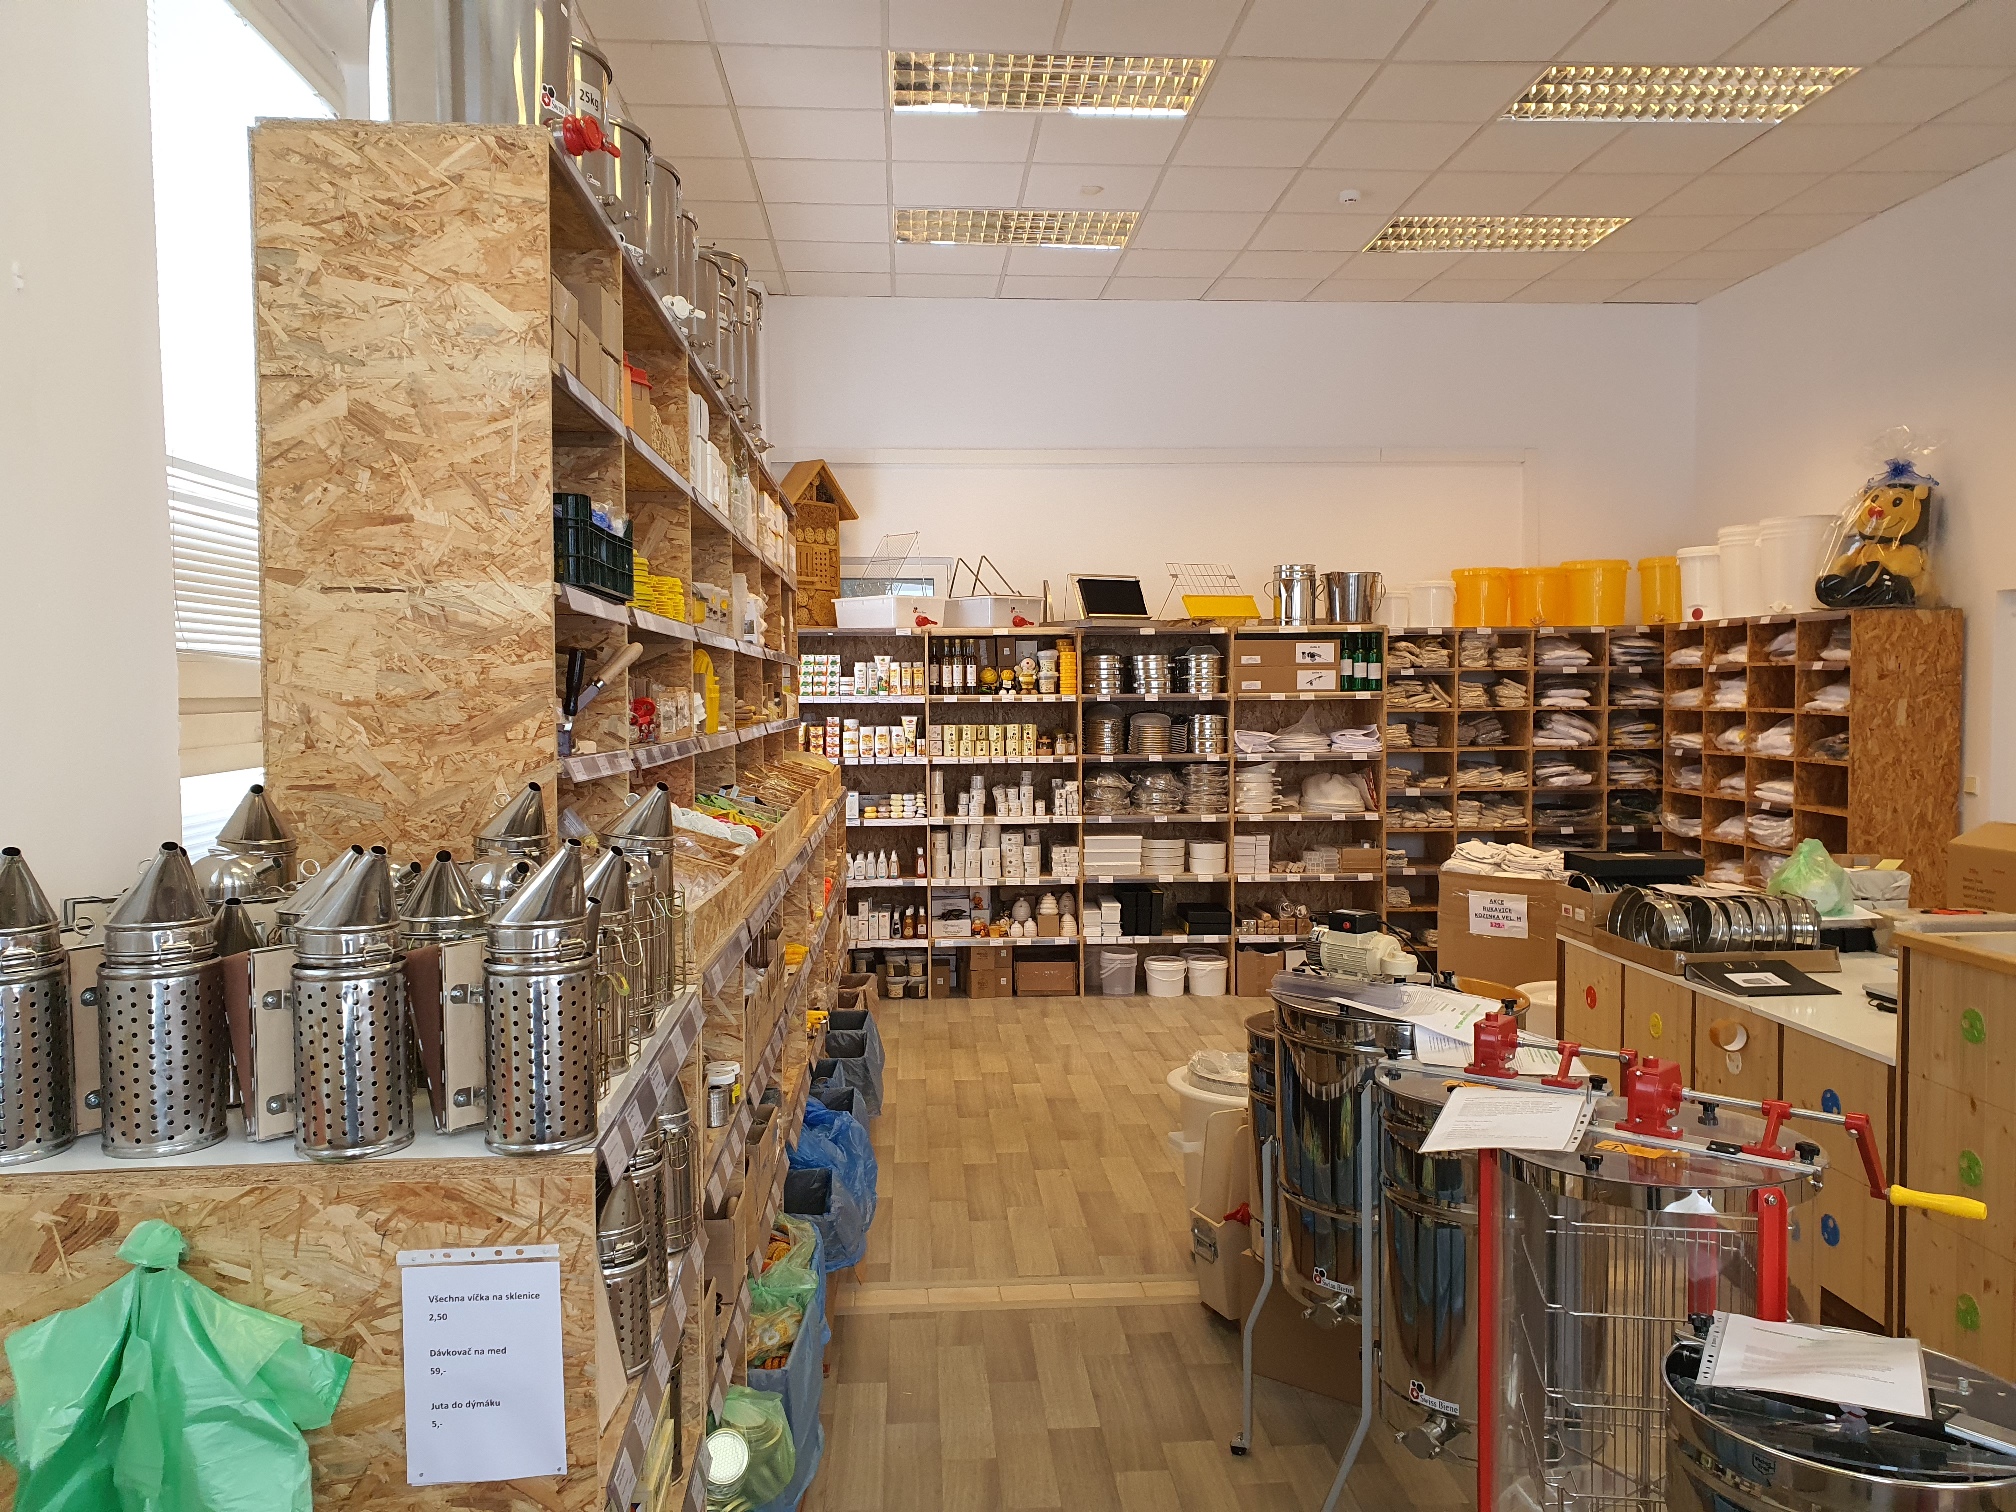 Our beekeeping store